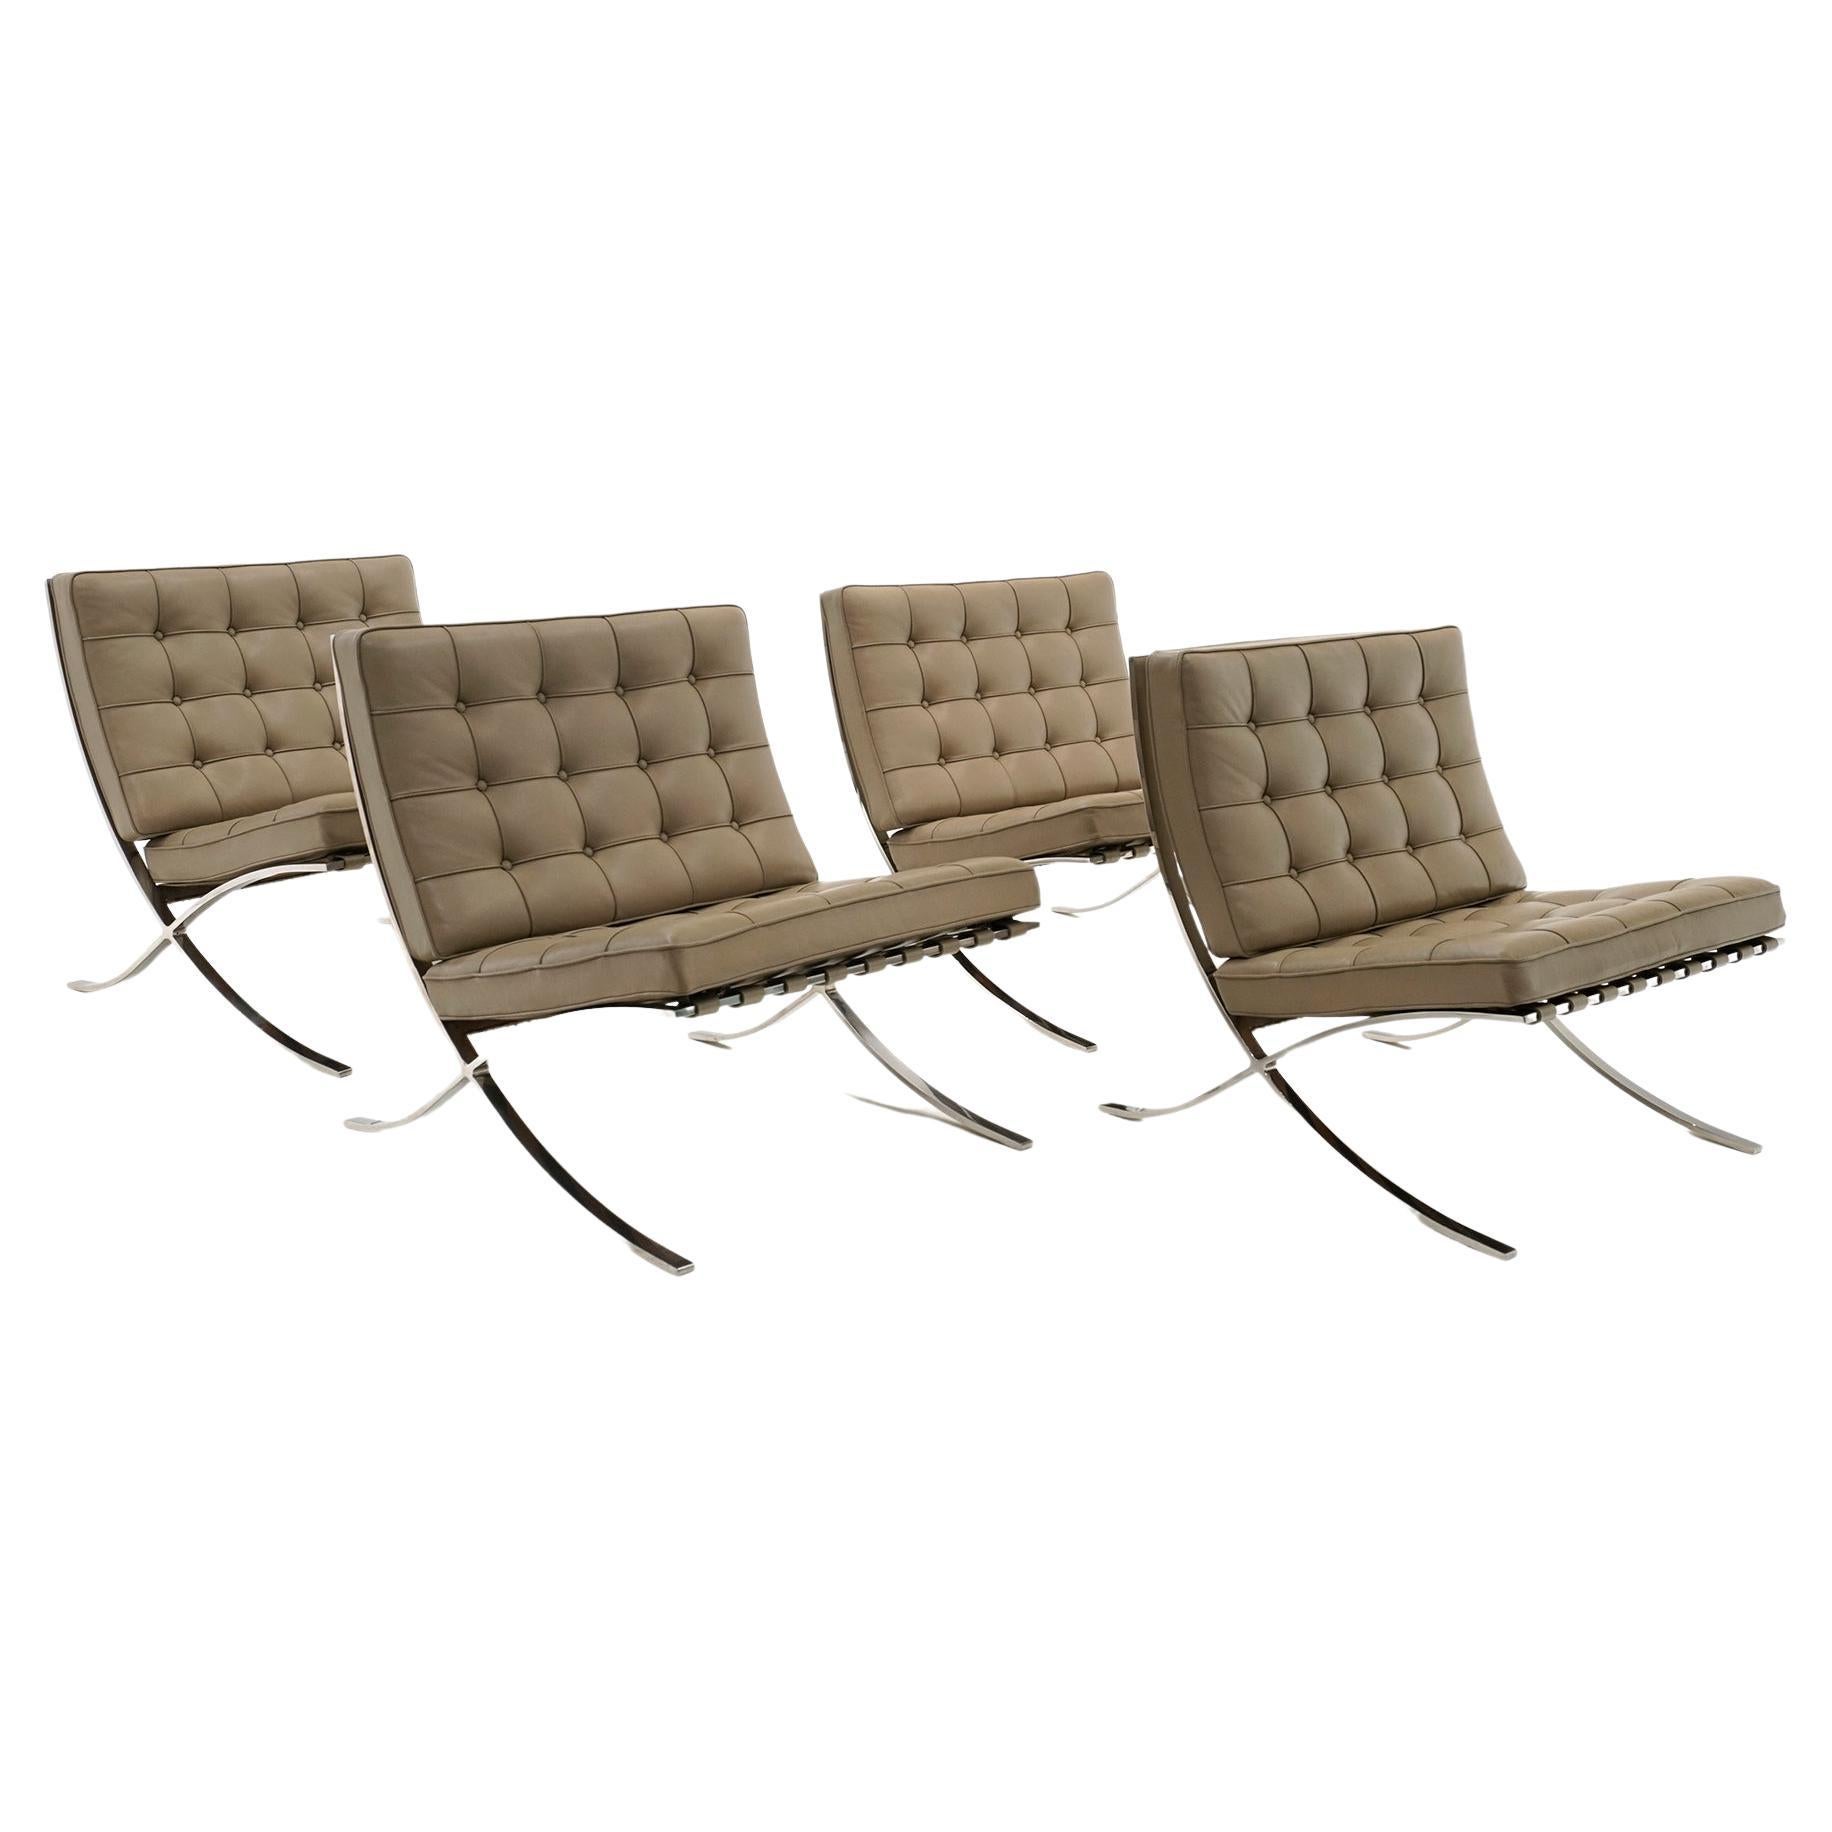 Knoll Barcelona Chairs by Ludwig Mies van der Rohe, Leather, Stainless Steel For Sale